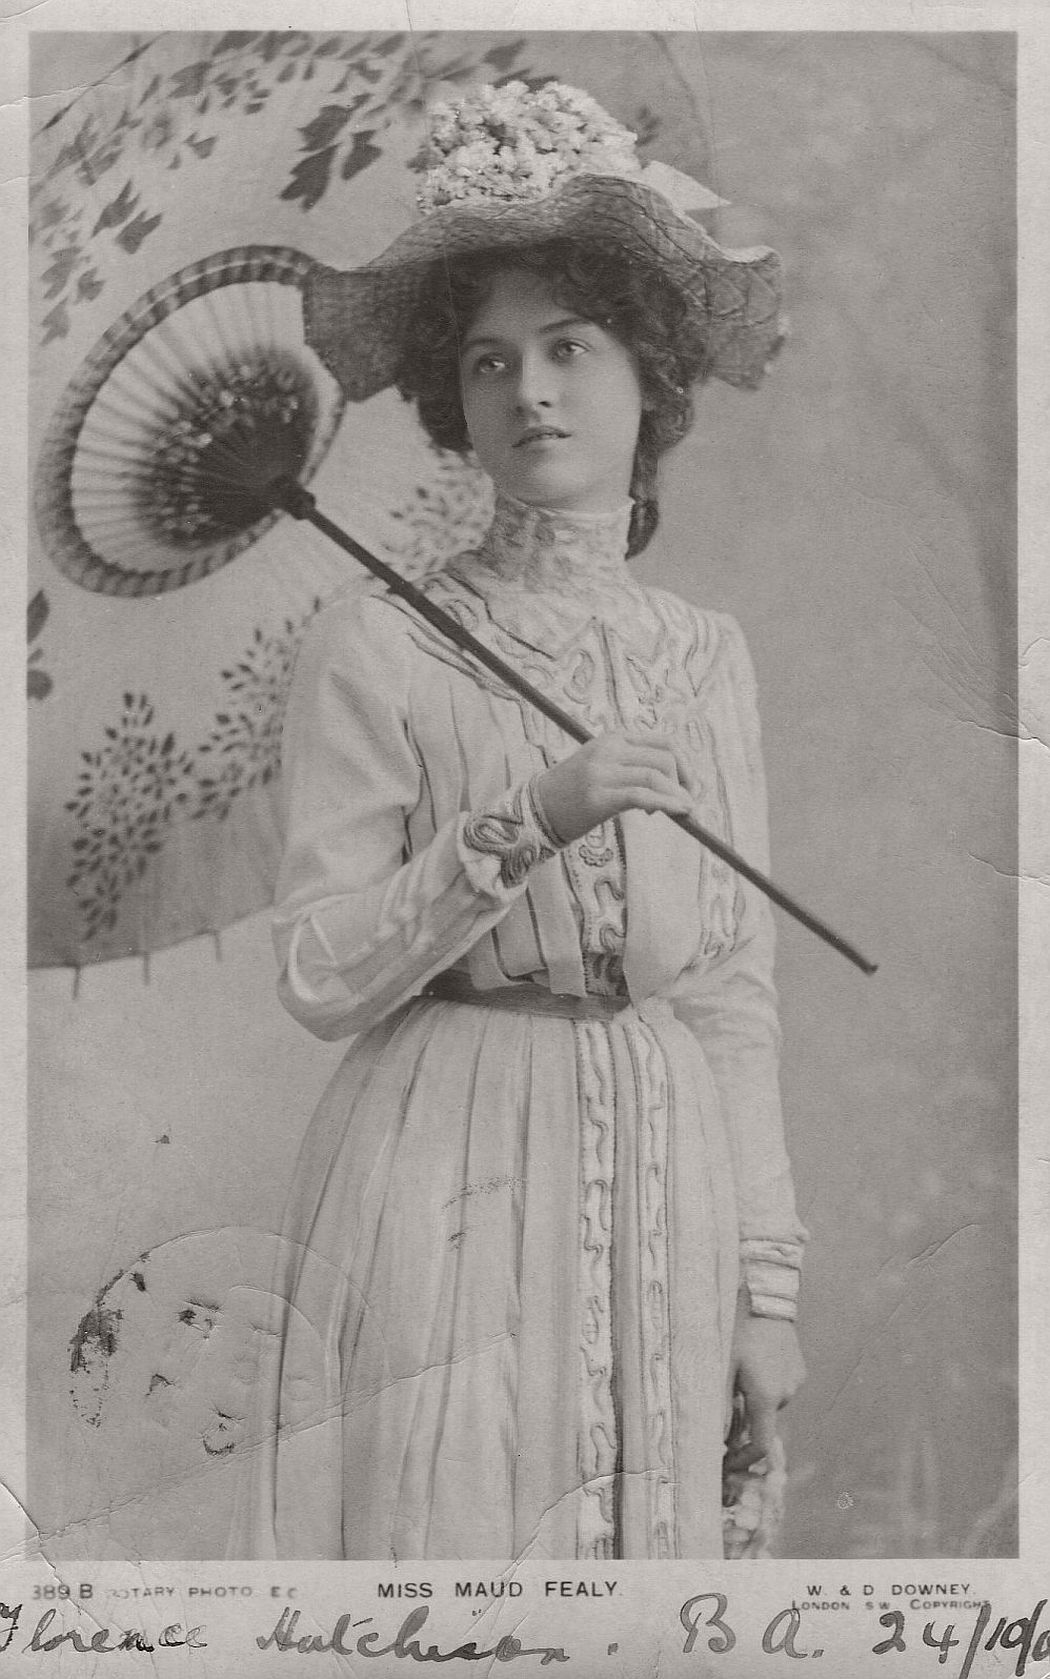 vintage-postcard-of-actress-miss-maude-fealy-1900s-early-xx-century-04